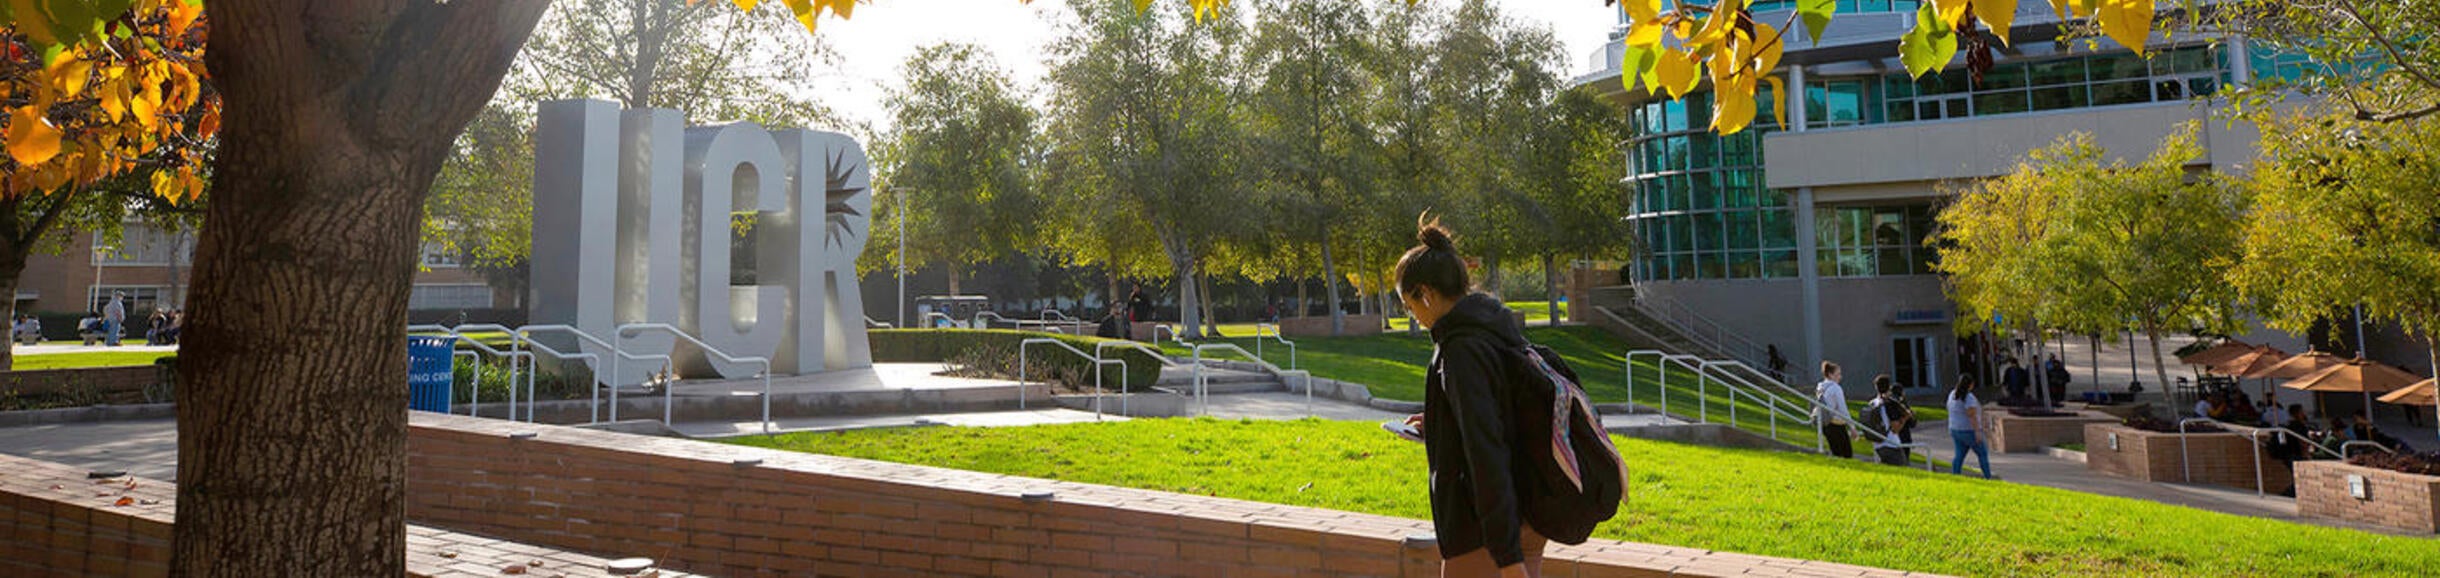 student walking past UCR sign under fall leaves (c) UCR/Stan Lim